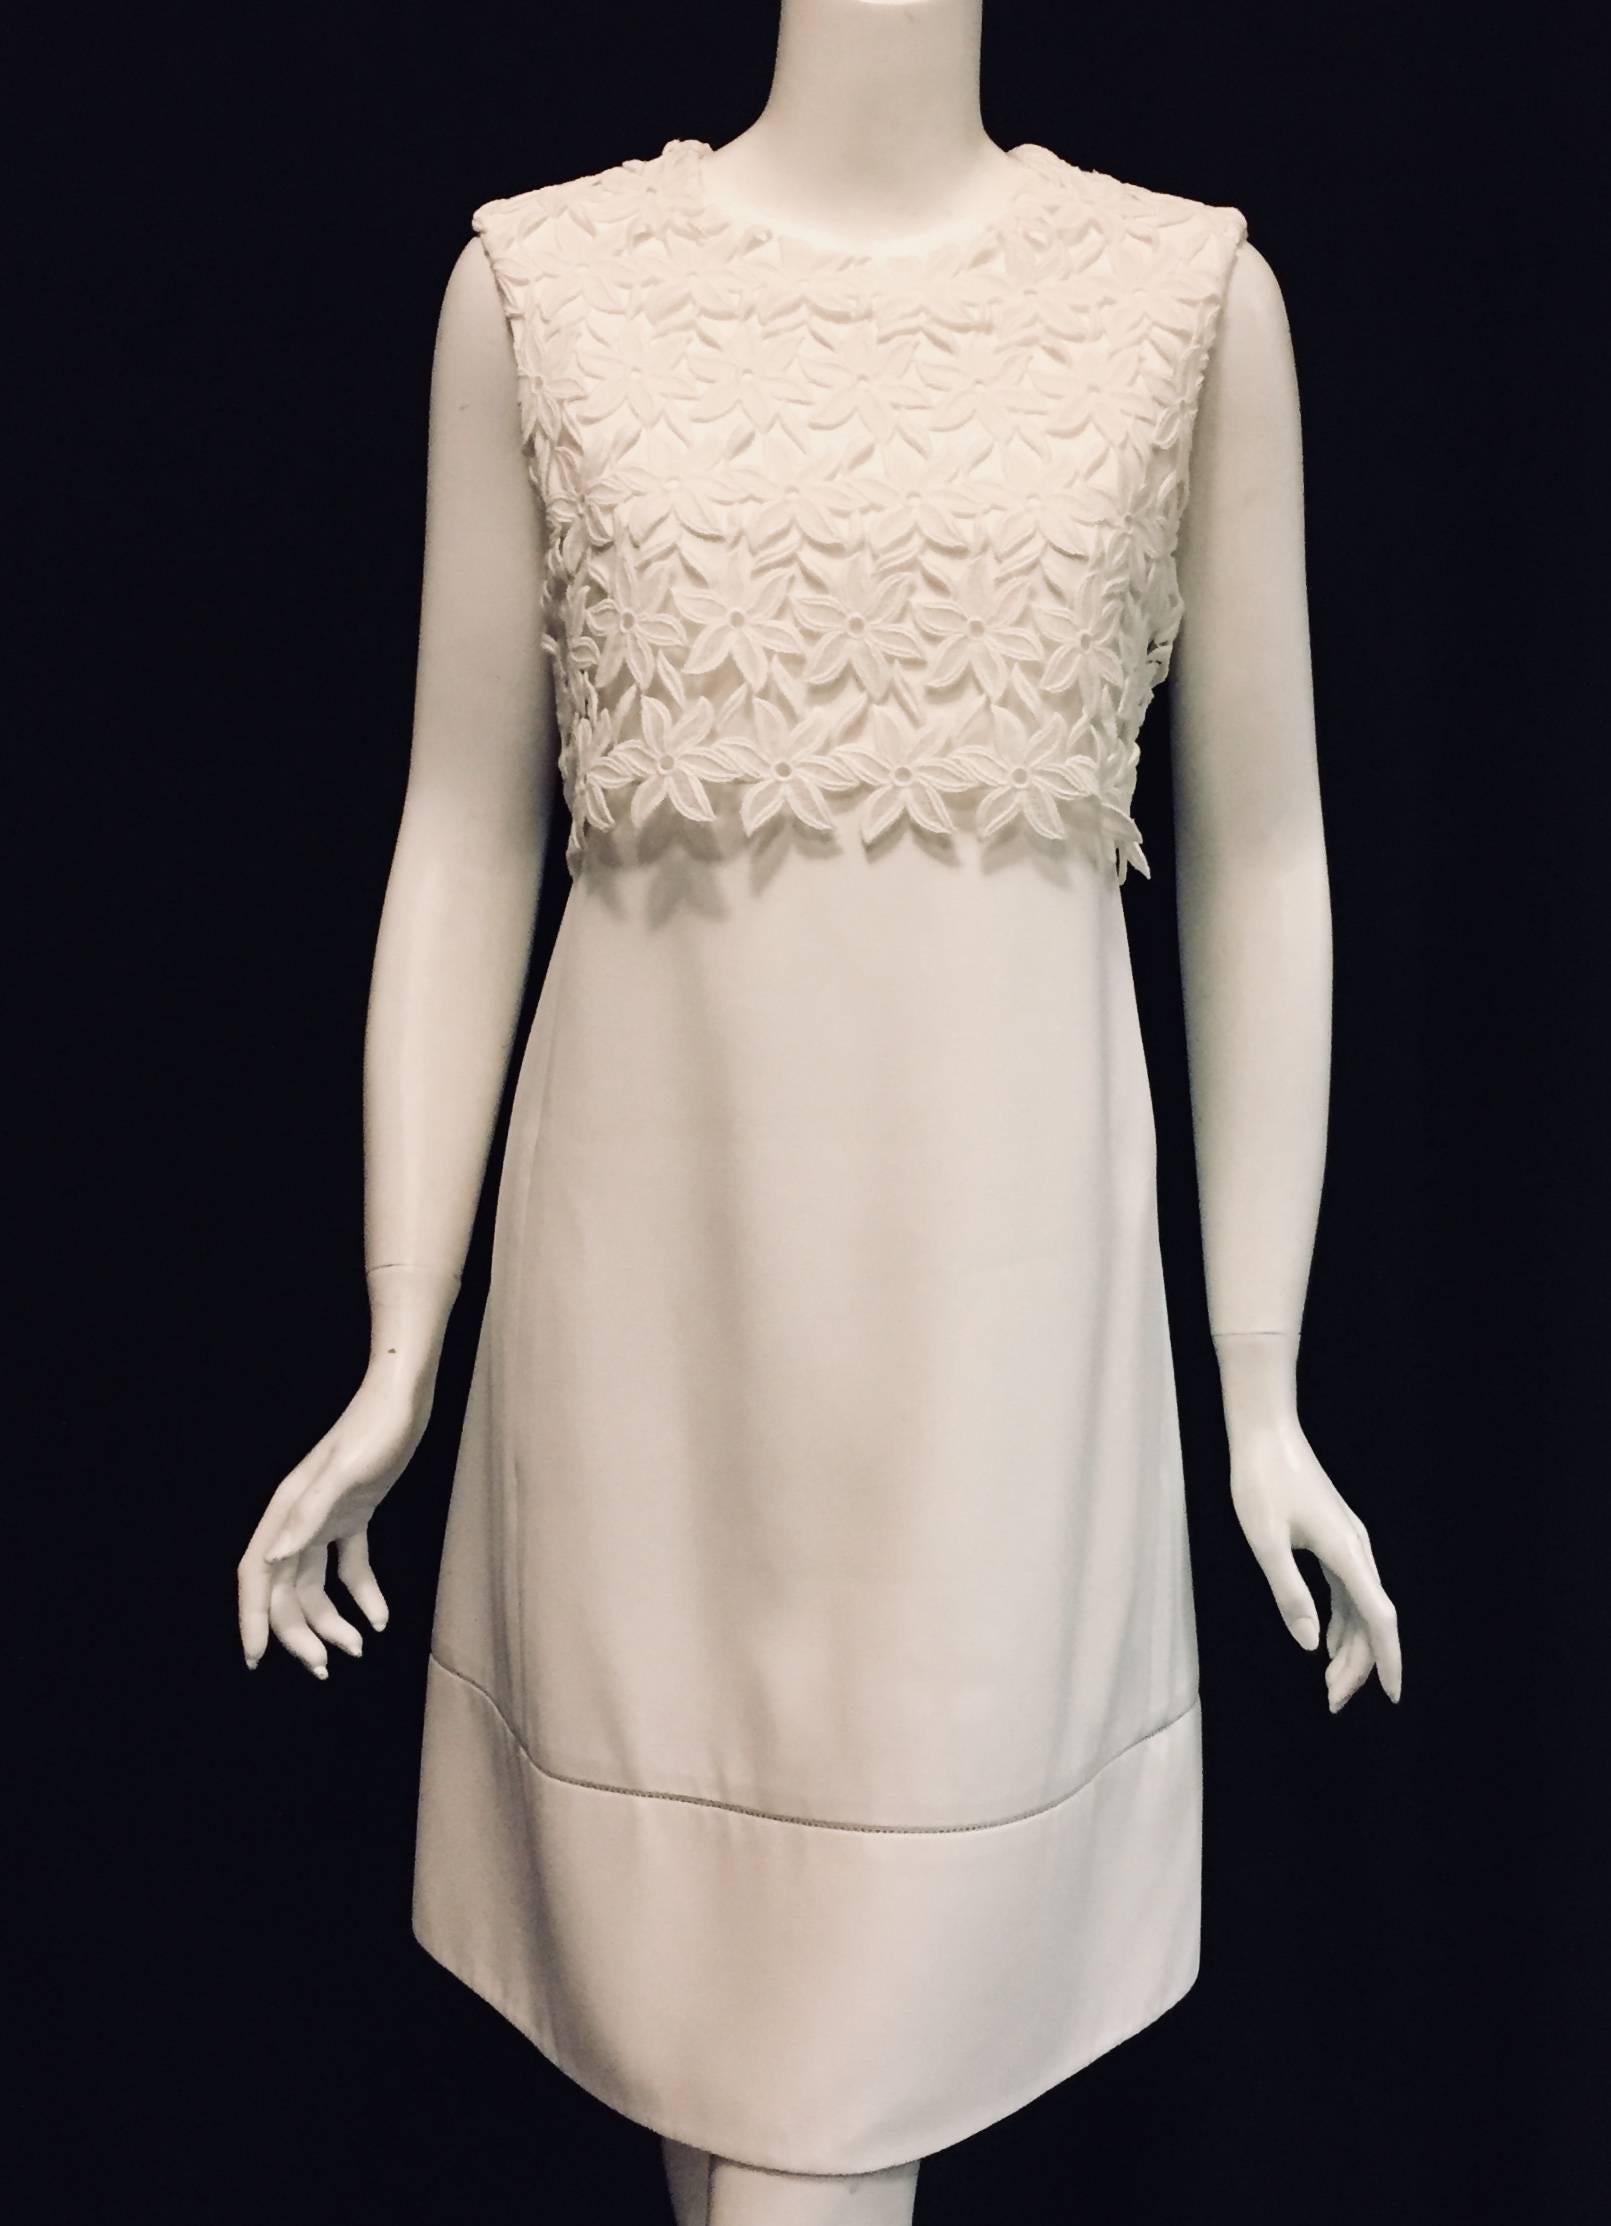 Chloe floral lace sleeveless white cotton dress is scallop cut to the waist.  A classical french romantic style dress with round neckline and a-line skirting.  The hem band is separated from the rest of the dress with thin eyelet embroidery. 